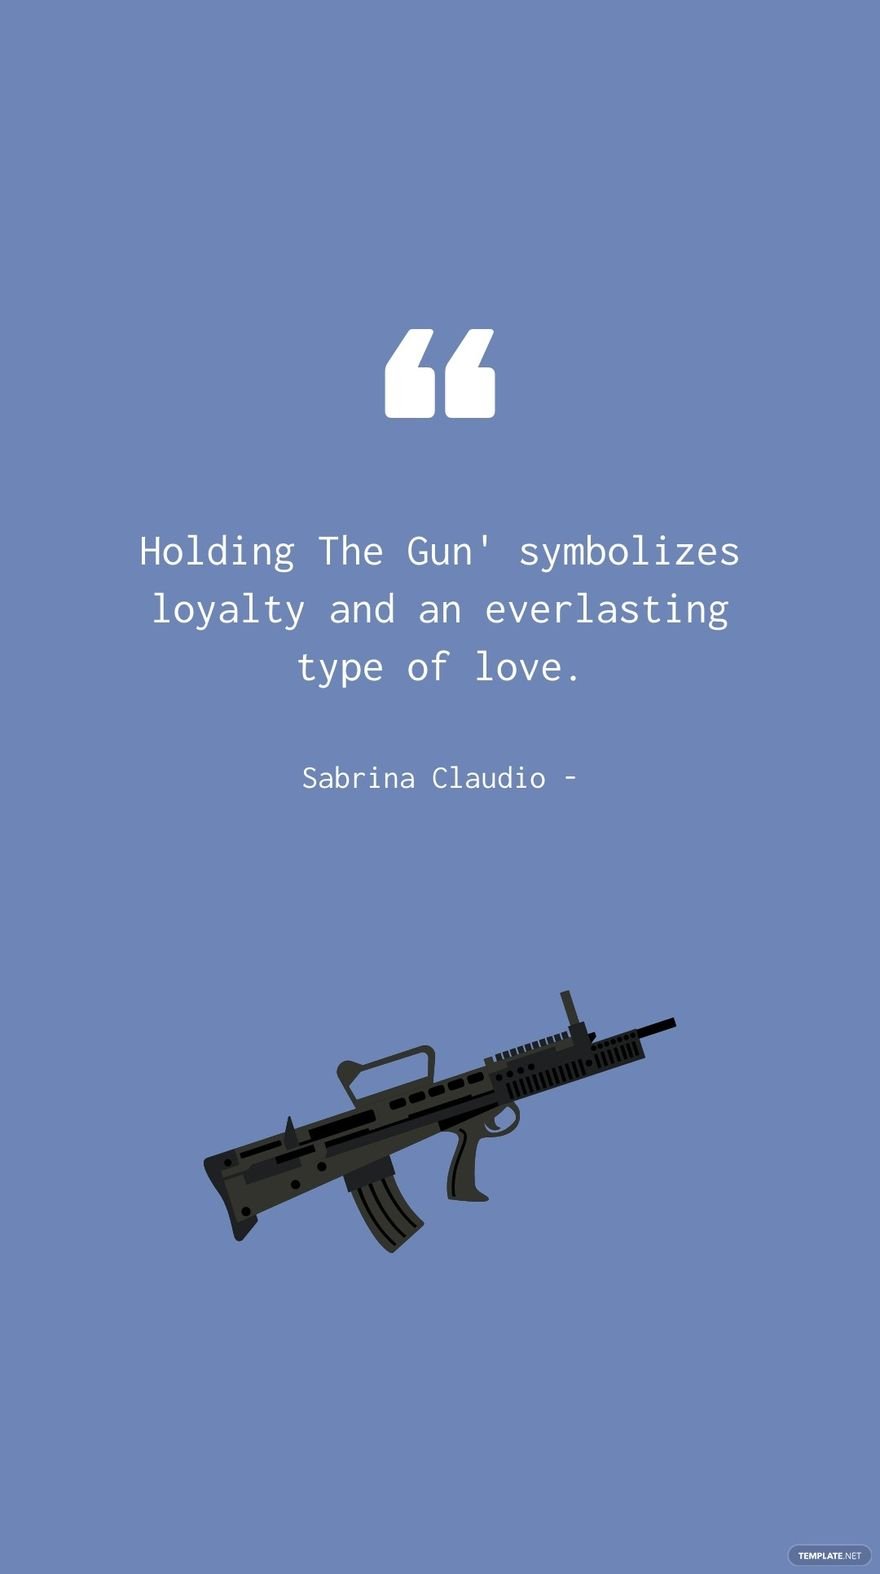 Sabrina Claudio - Holding The Gun' symbolizes loyalty and an everlasting type of love.